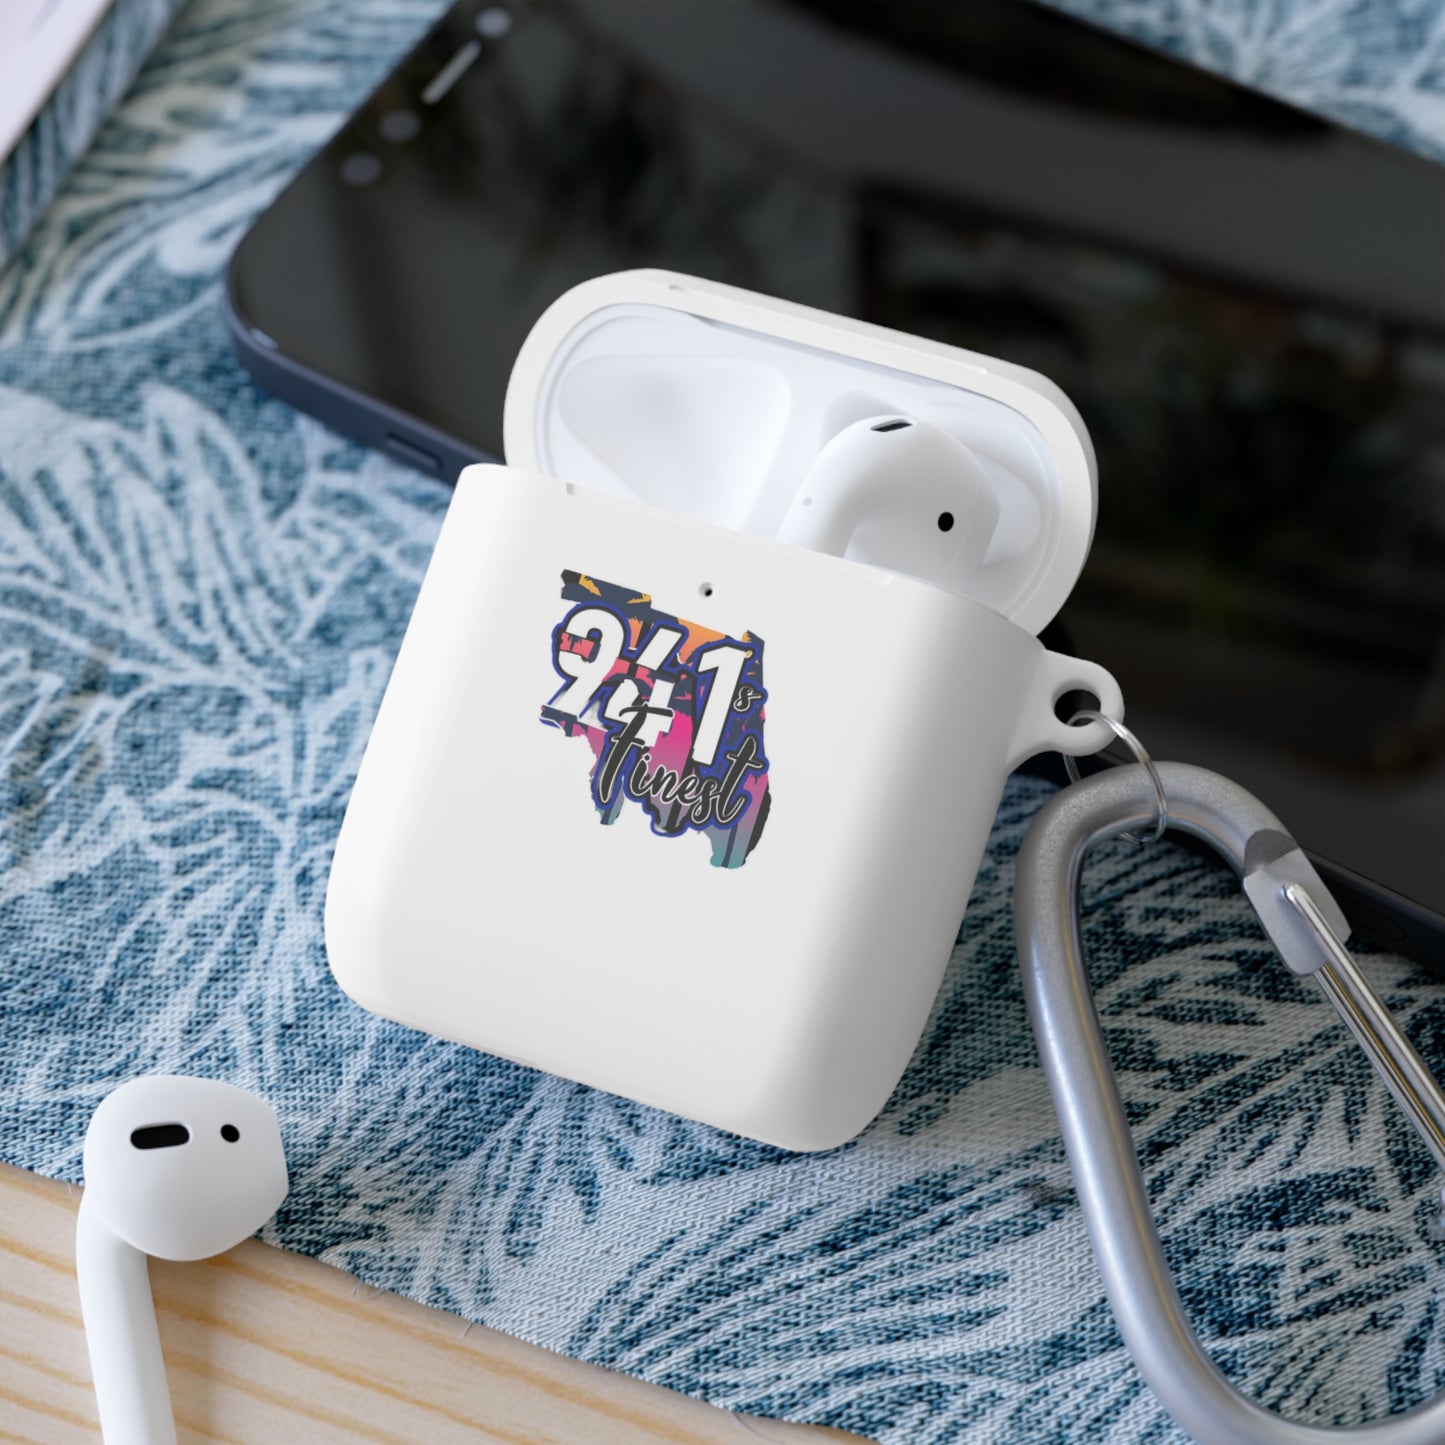 941s Finest AirPods and AirPods Pro Case Cover